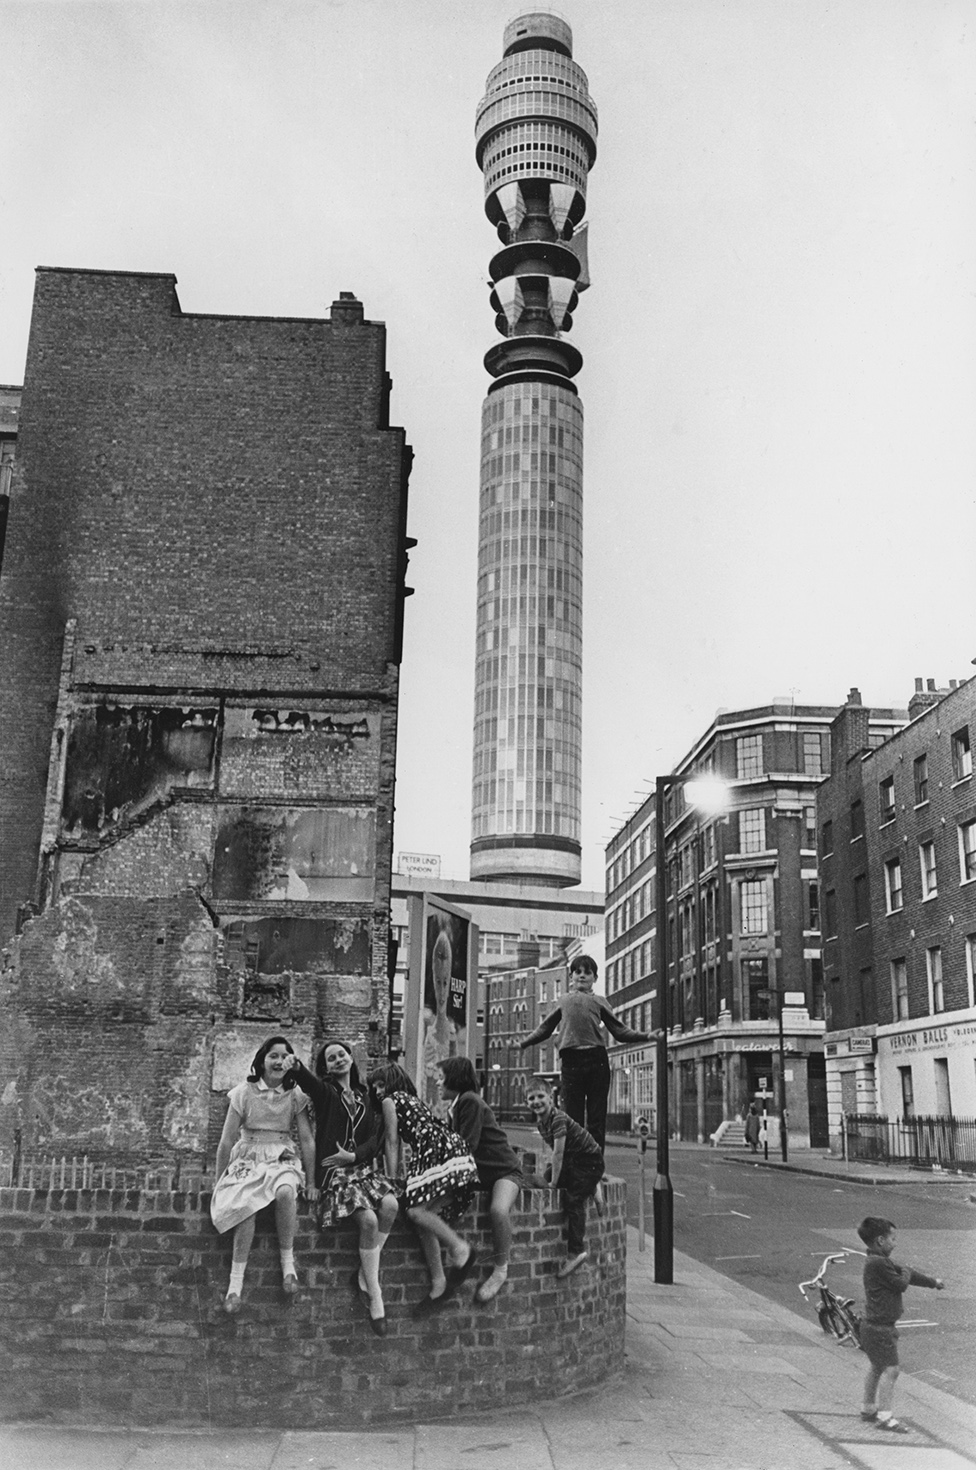 Children playing in front of the Post Office Tower, later the BT Tower, in London, 1965